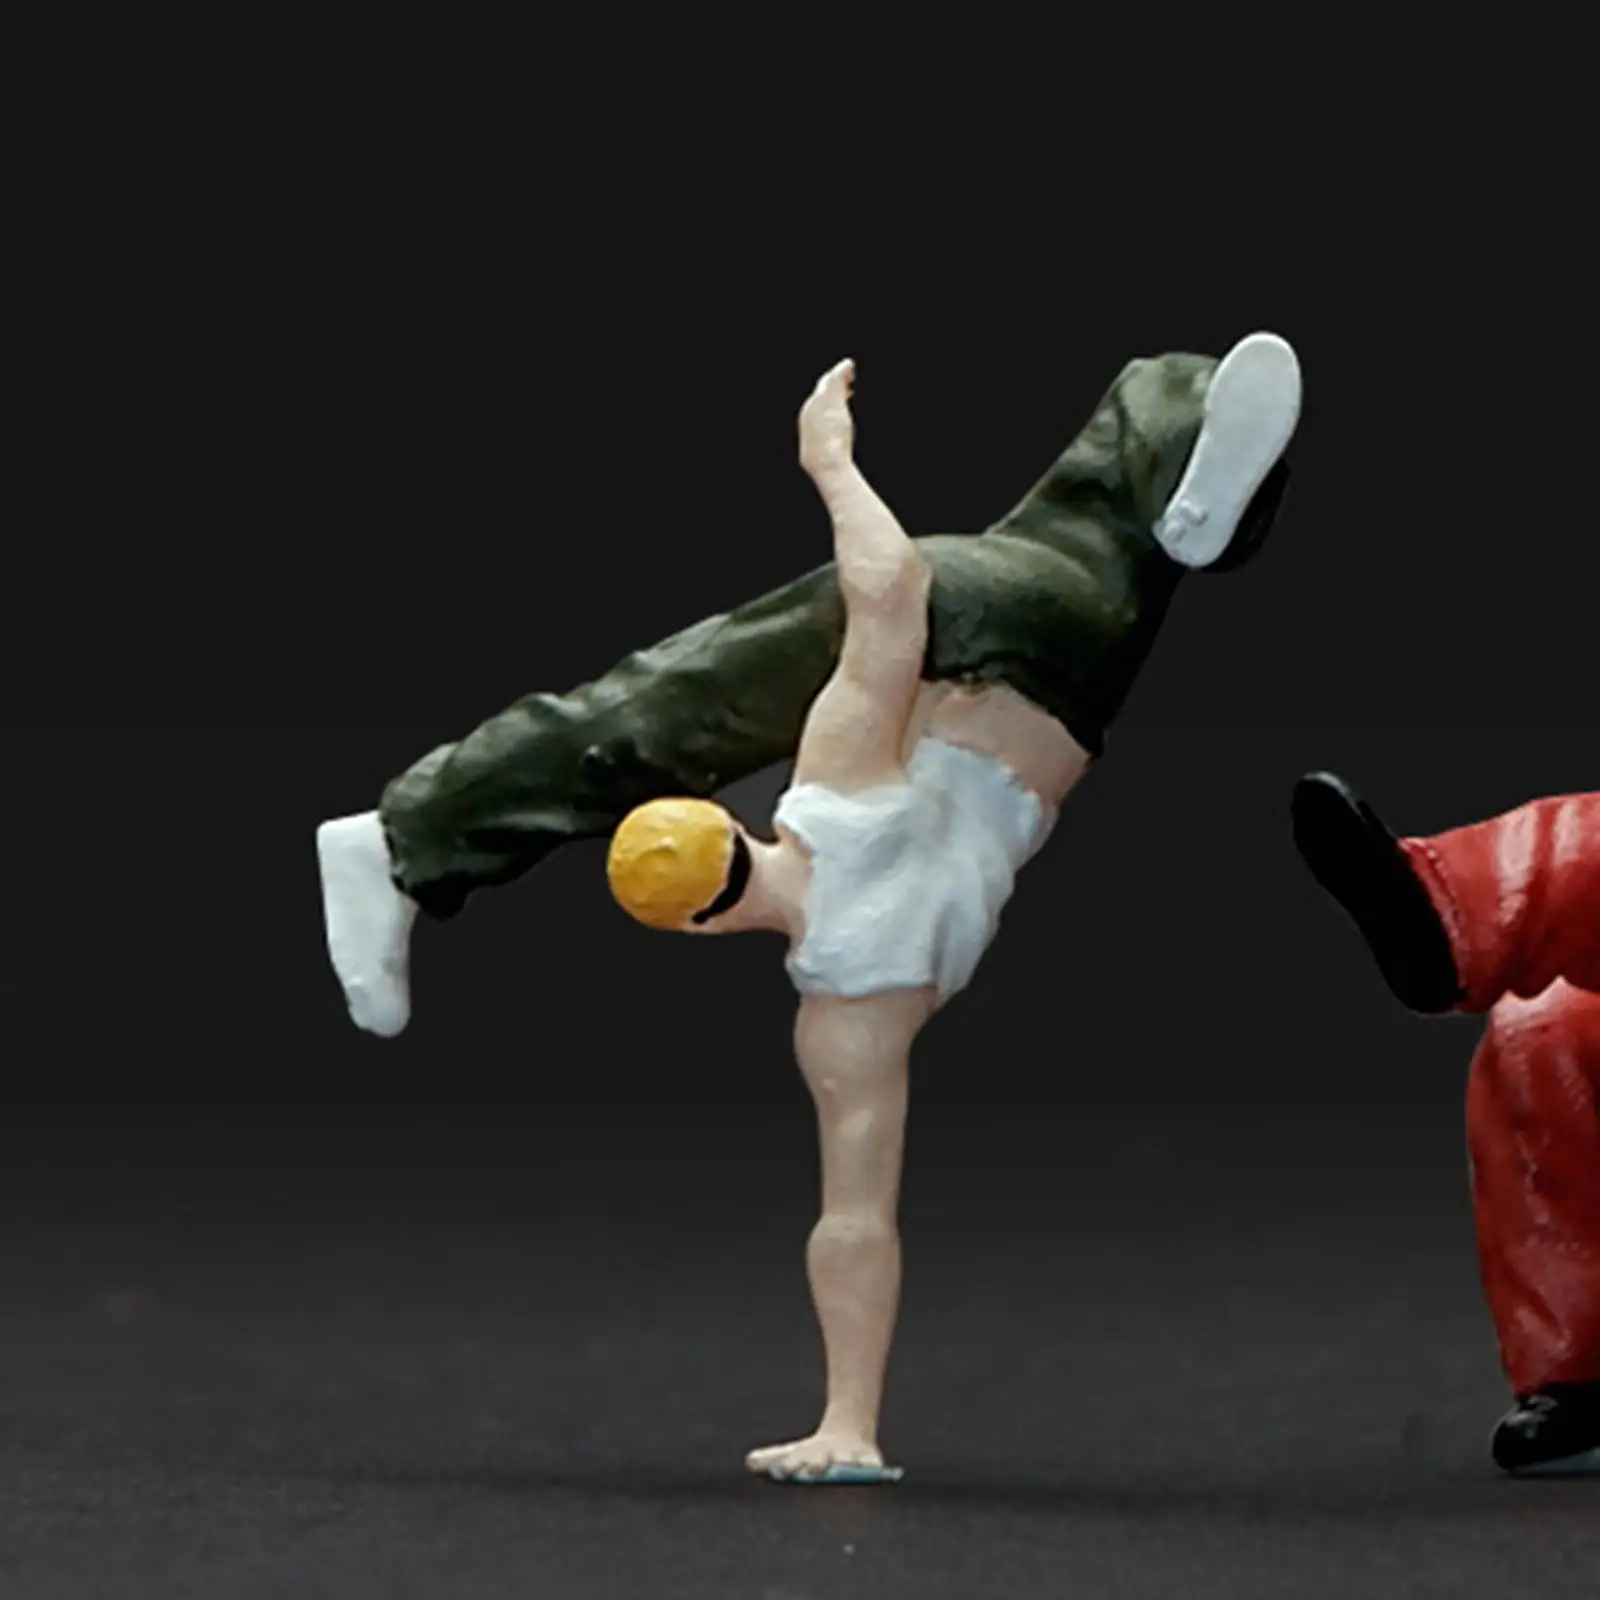 1/64 Scale Figure Street Dancer Movie Character Handpainted for Layout Desktop Ornament Fairy Garden Diorama Scenery S Scale